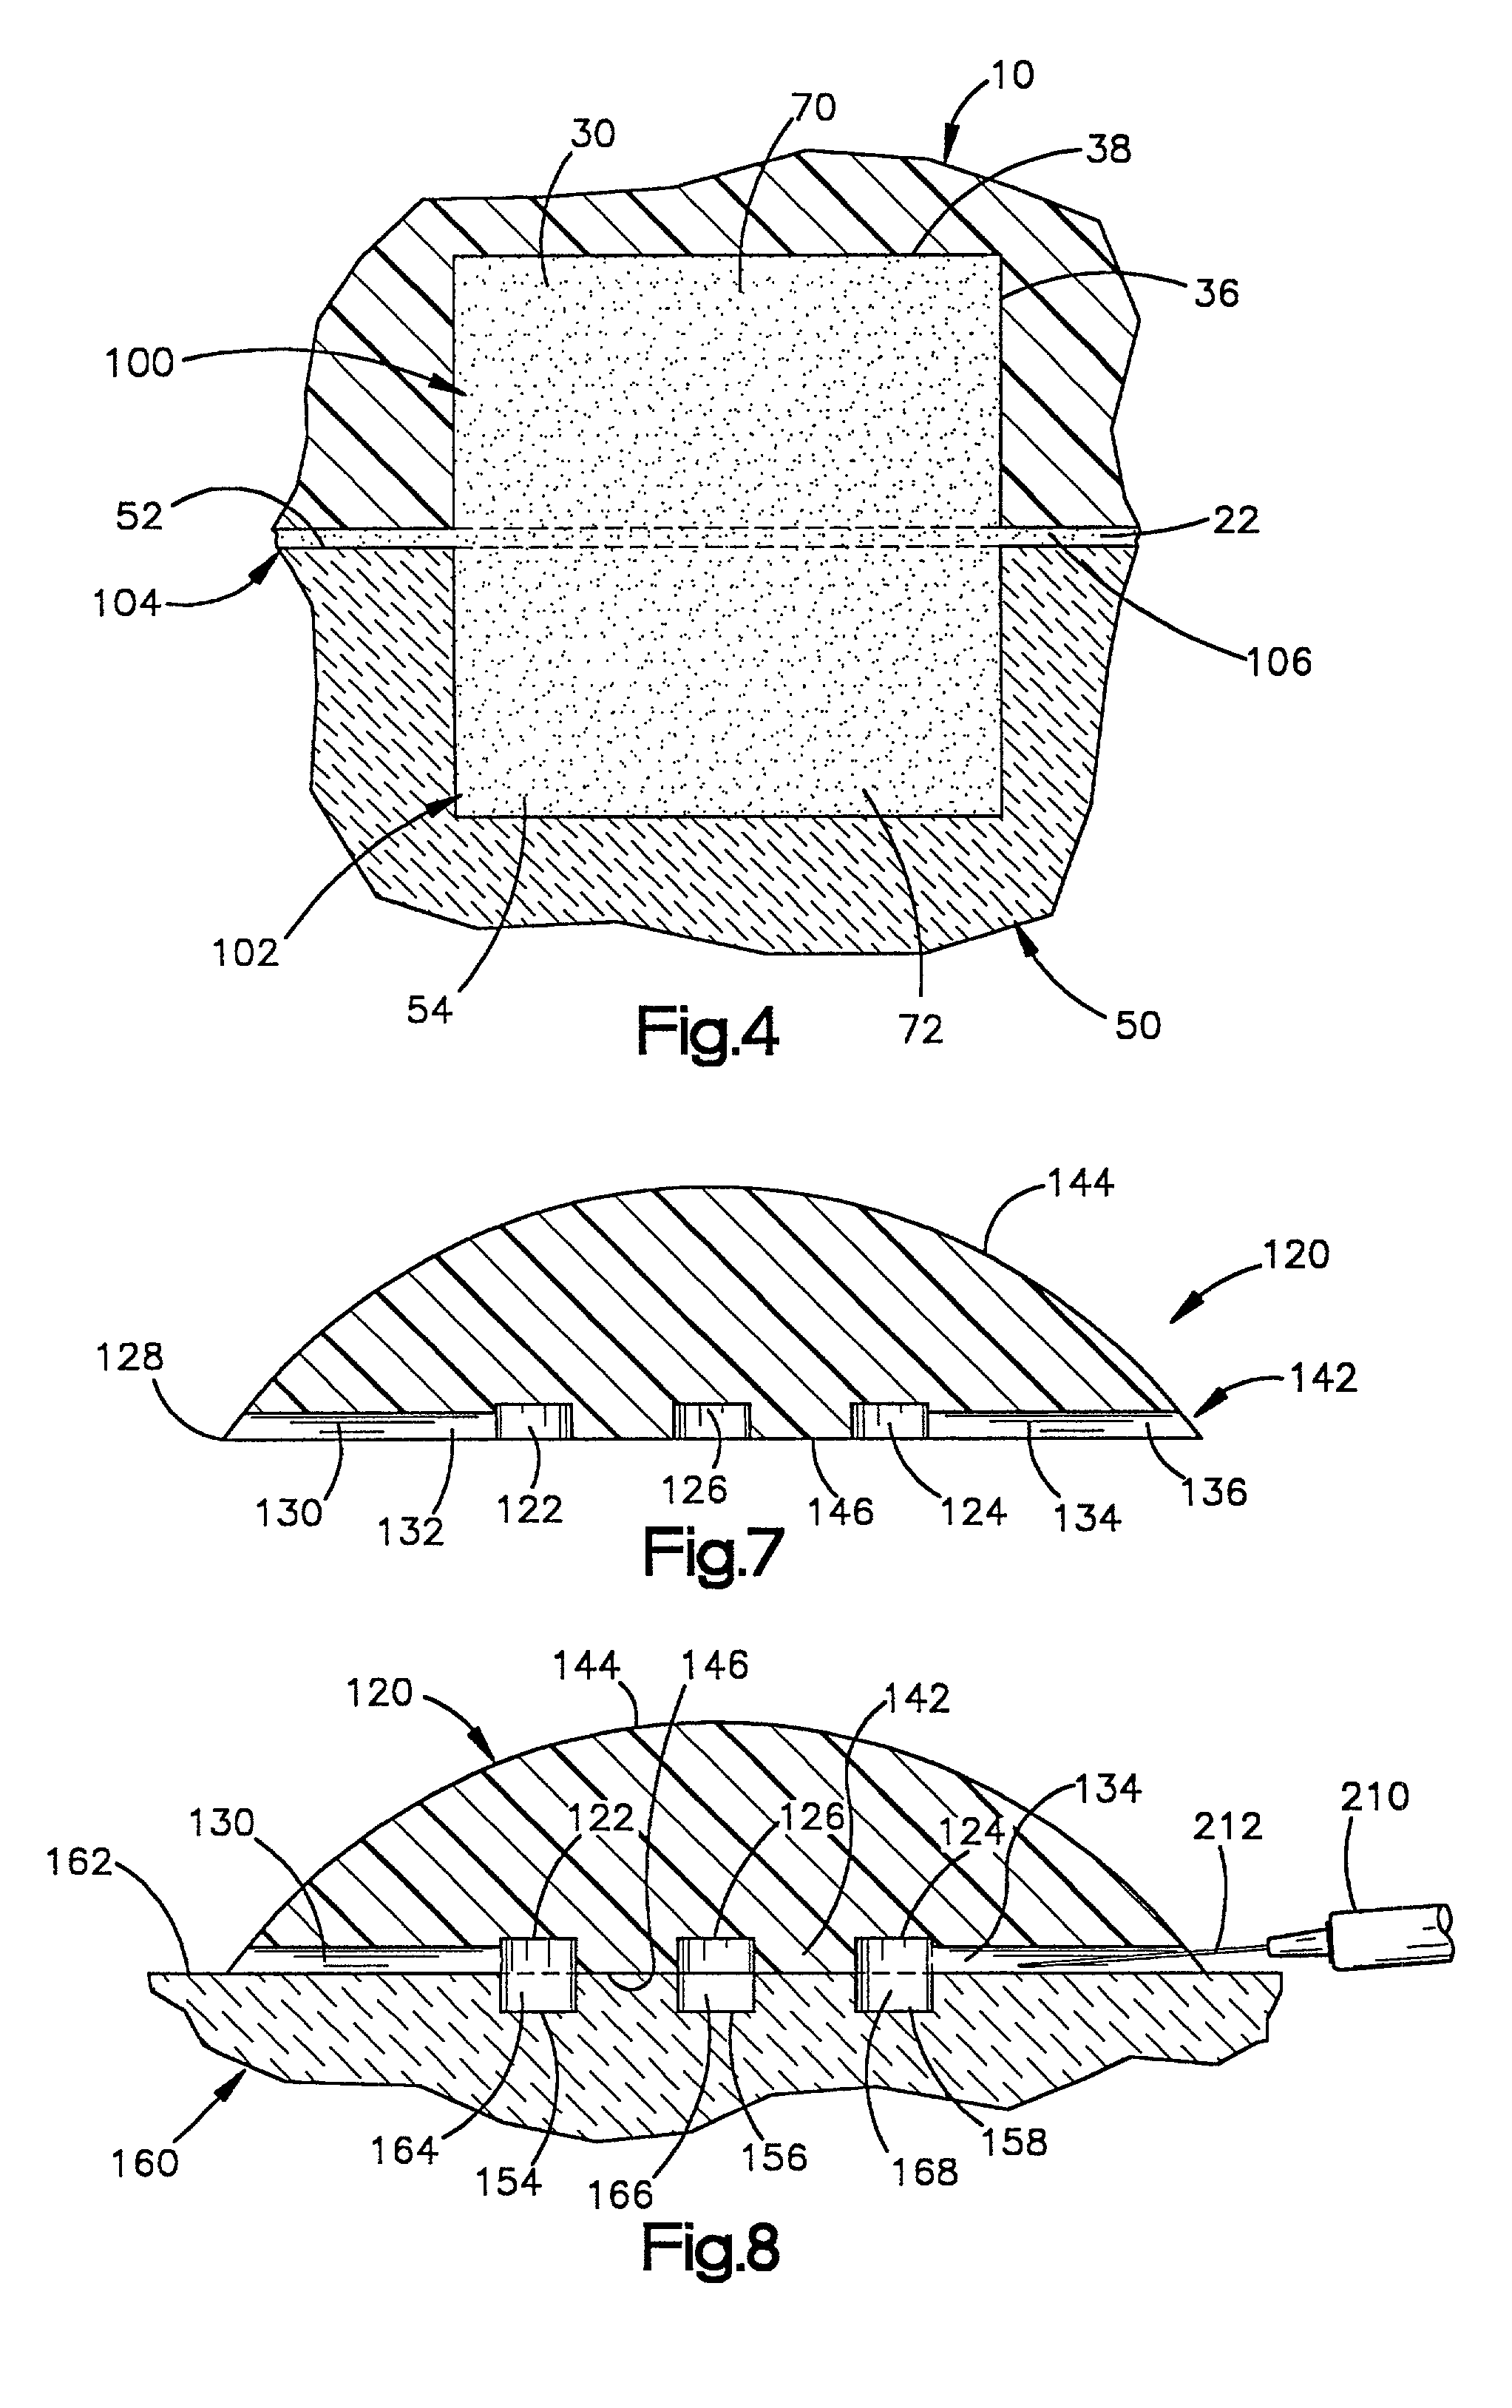 Bone implant and method of securing